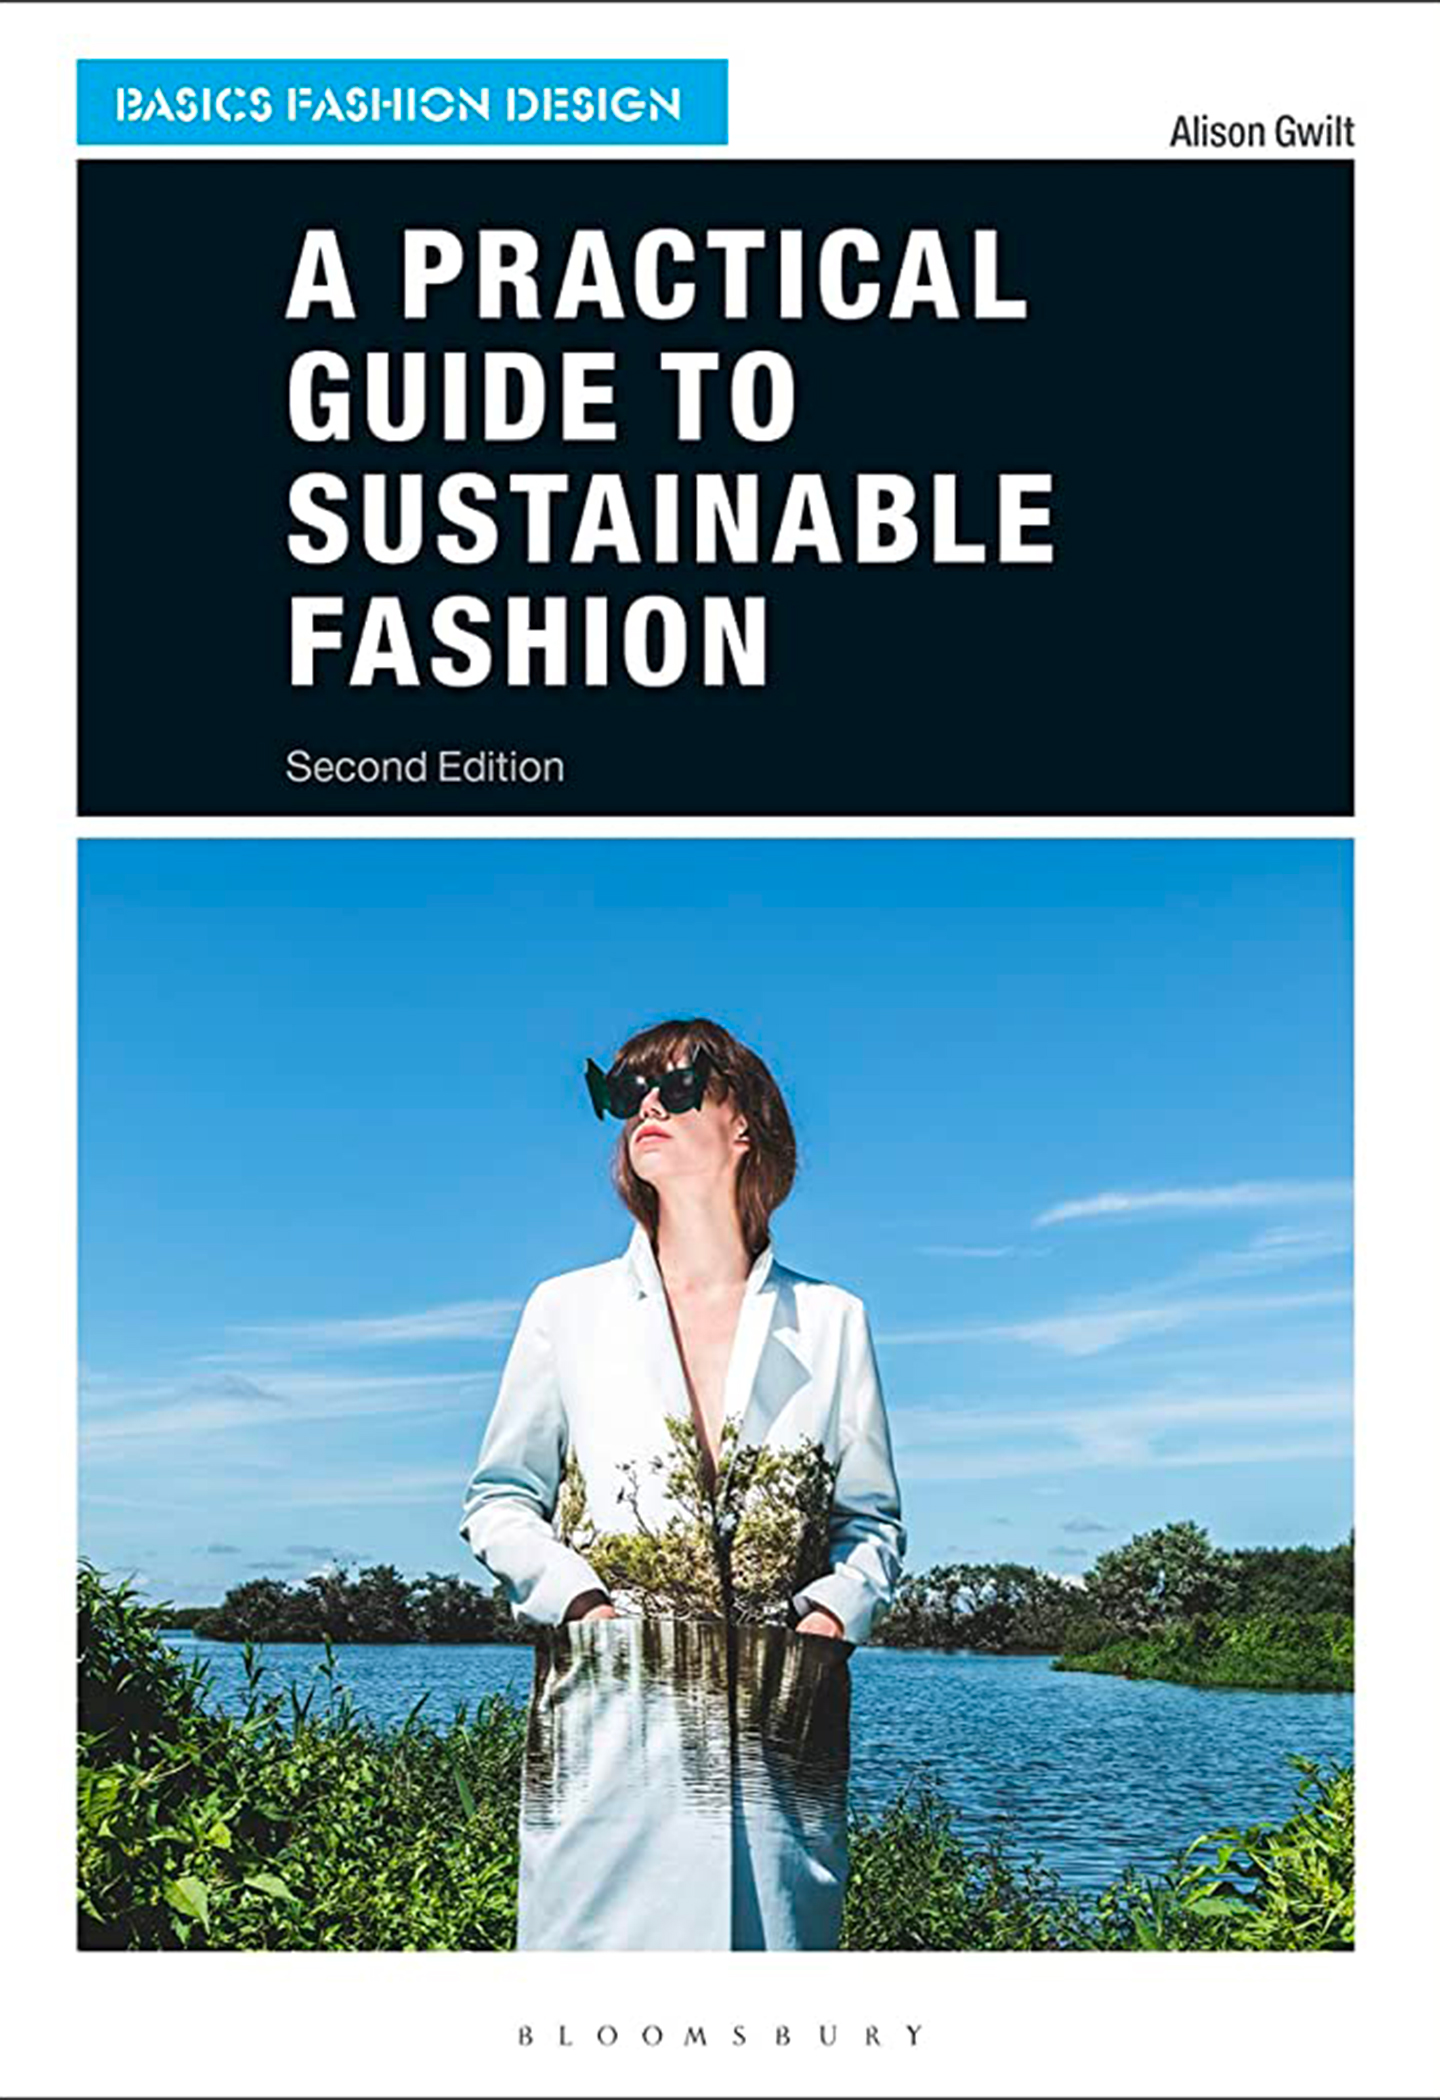 Gwilt, A. (2014) A practical guide to sustainable fashion. London: Fairchild Books, an imprint of Bloomsbury Publishing Plc. (Basic fashion design)